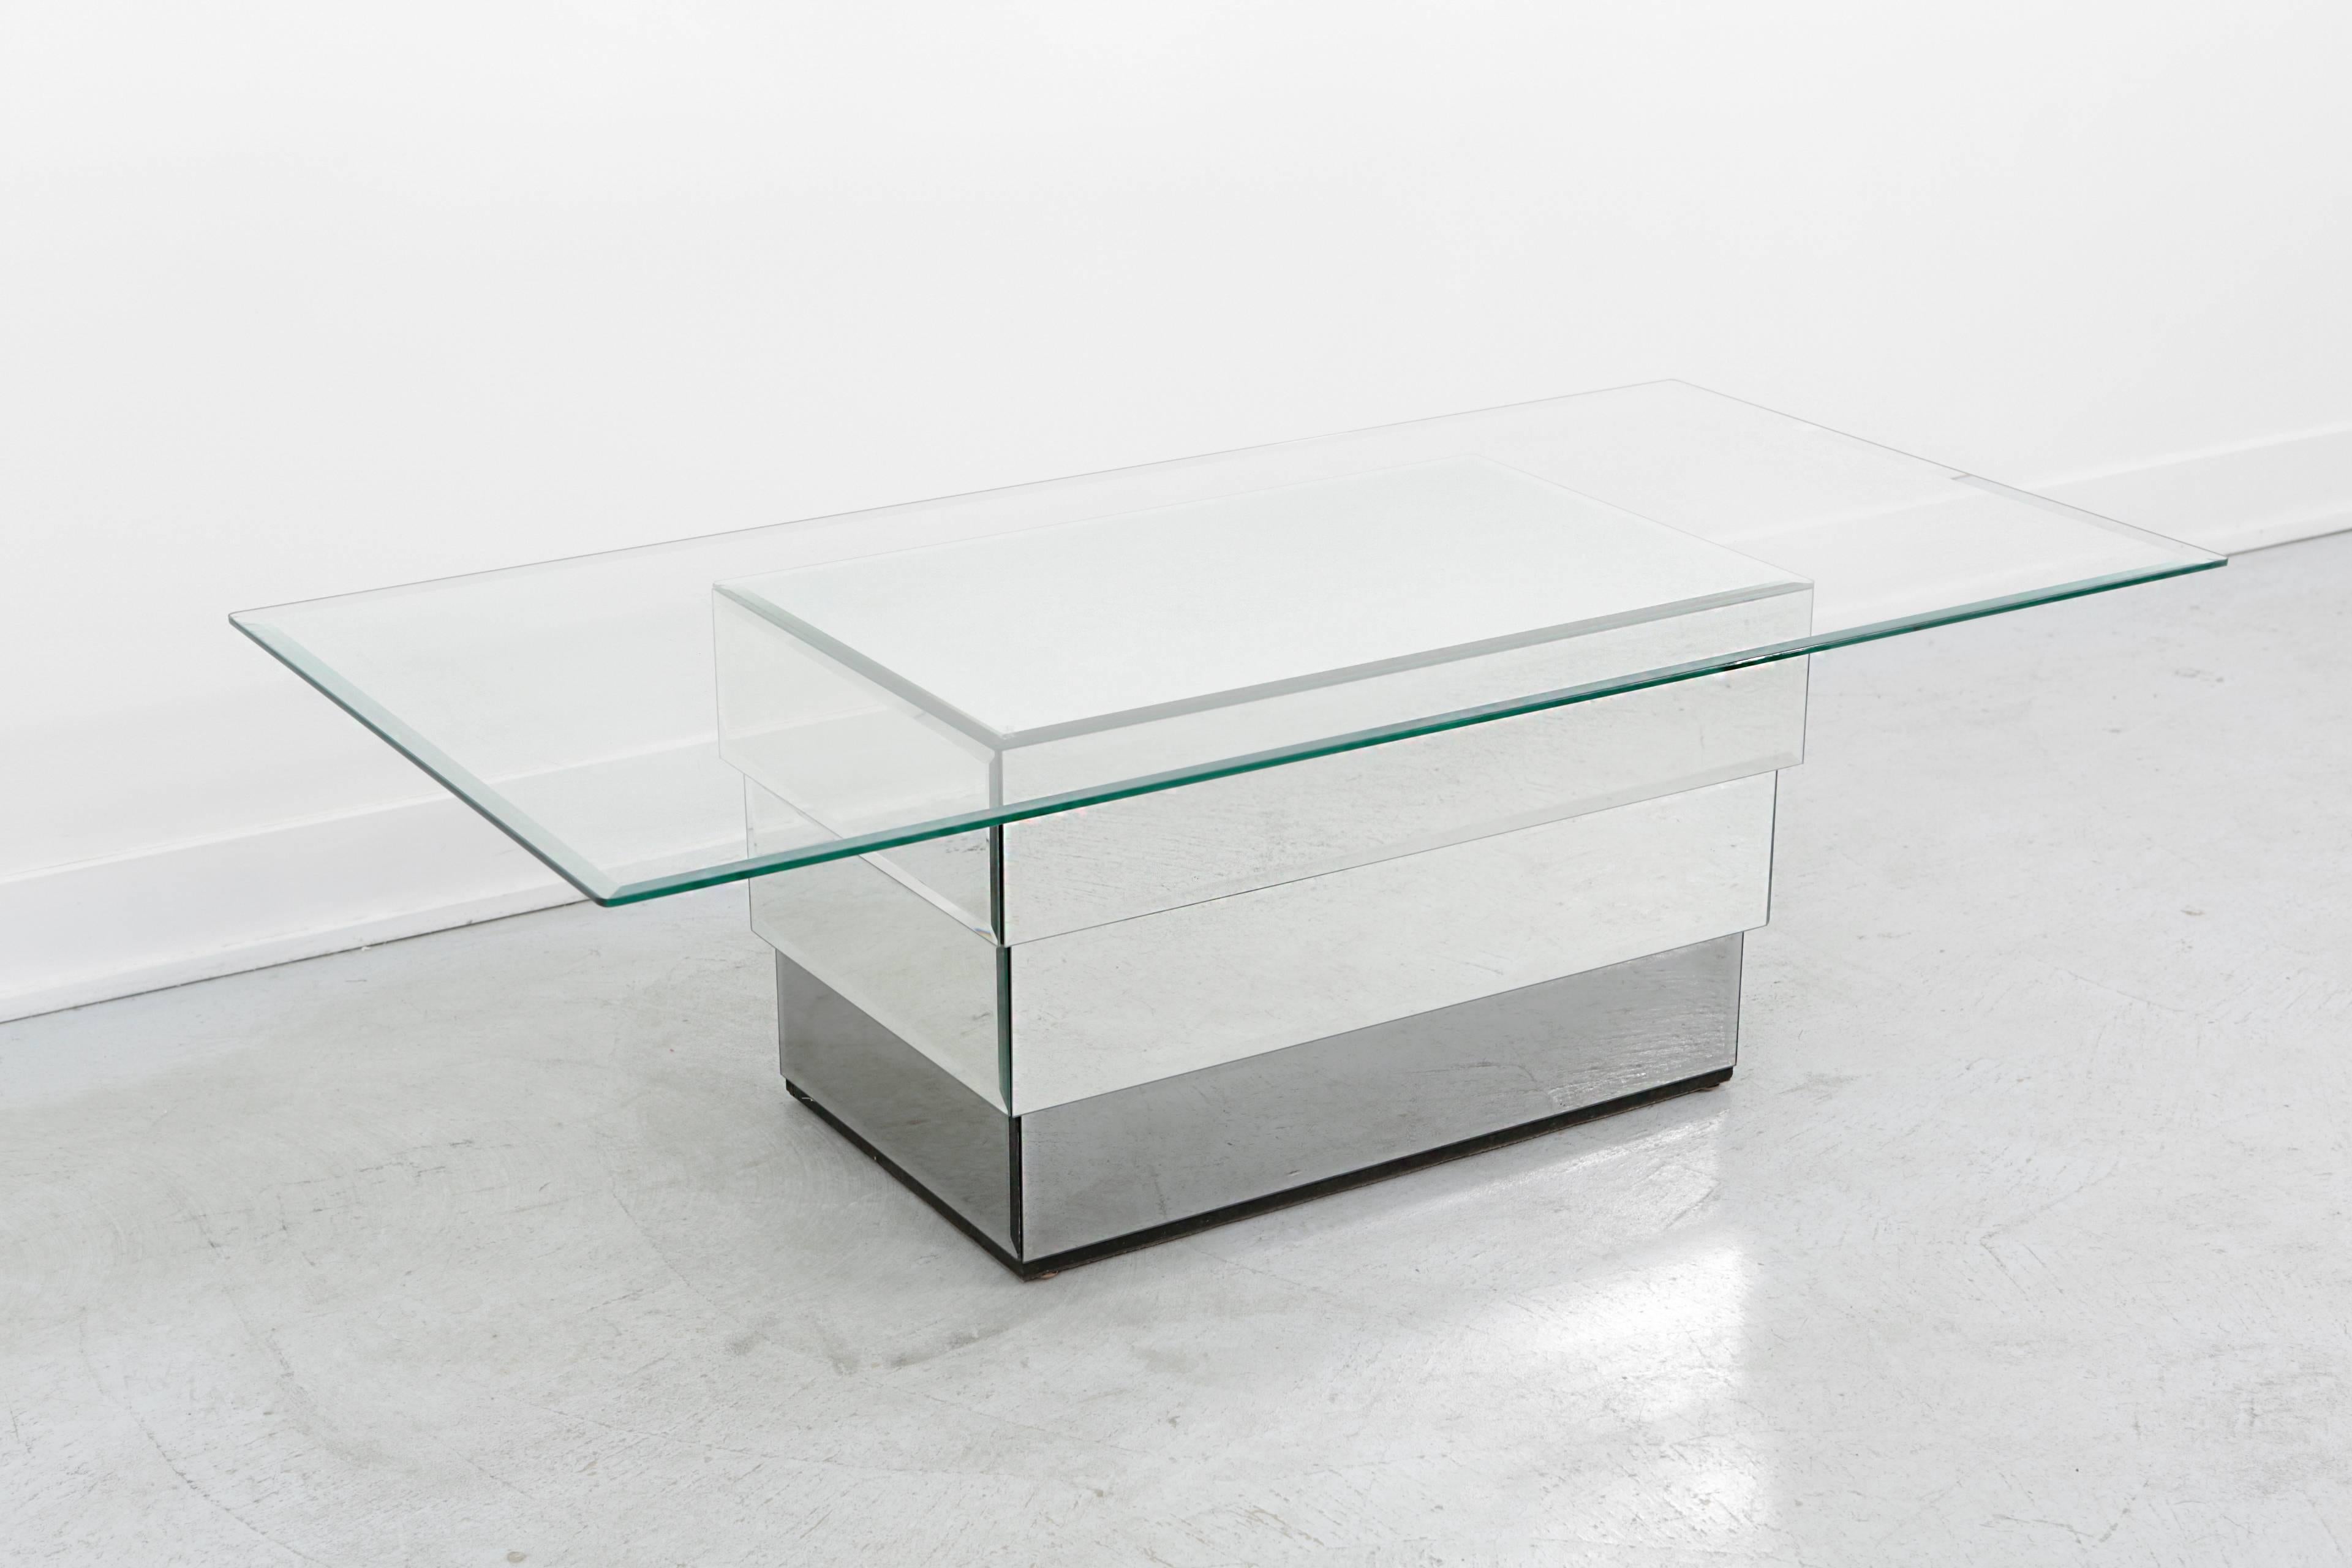 Ello glass and mirrored coffee table. A rare cocktail - coffee table with a mirrored base that is tiered and a beveled glass top.